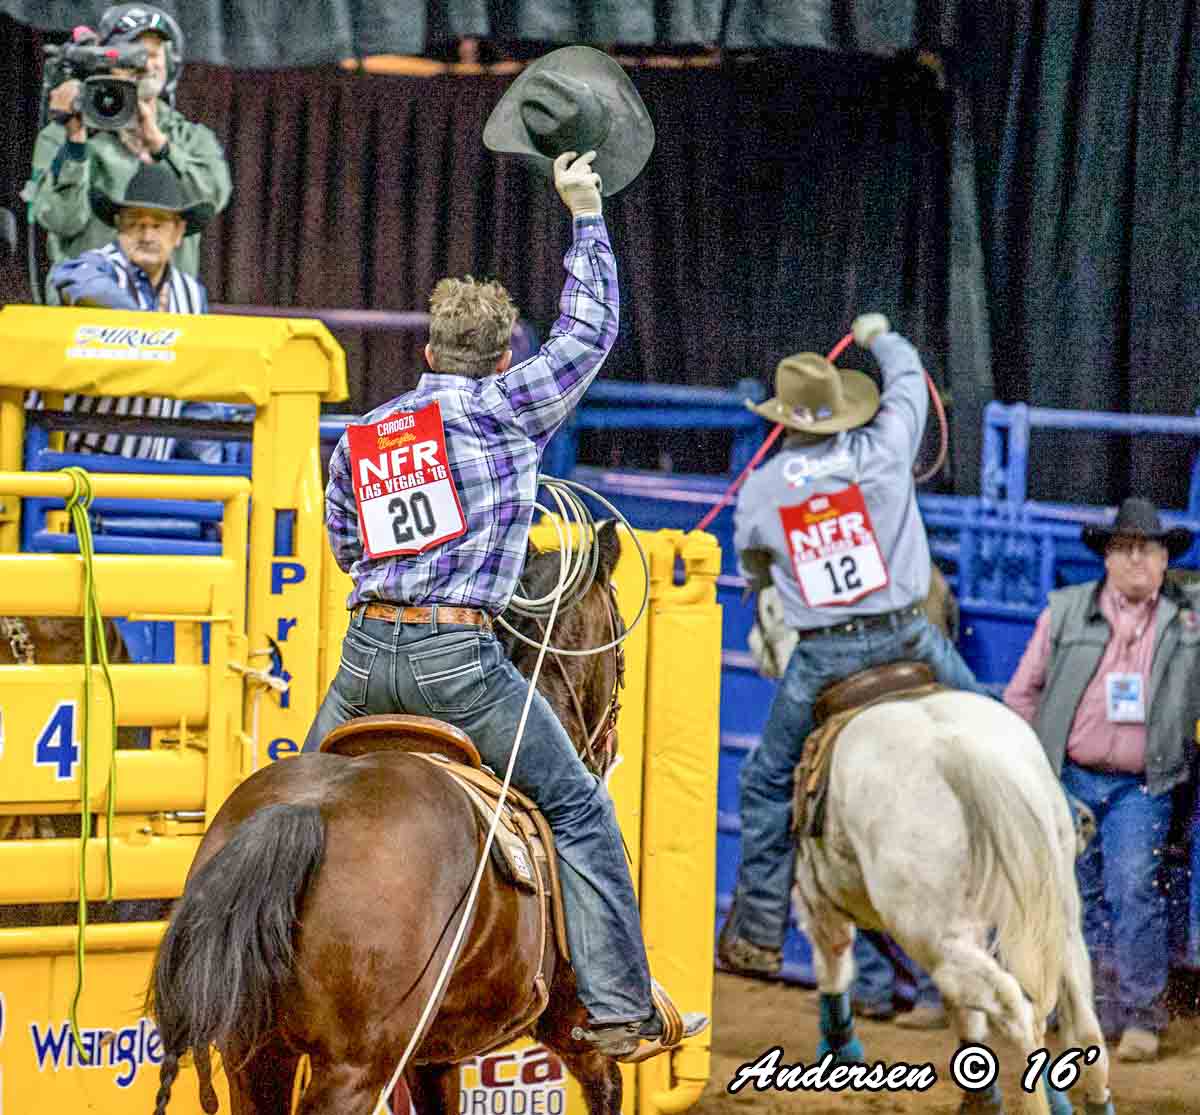 Dustin Bird and Russell Cardoza victory lap during Round 8 of the WNFR16